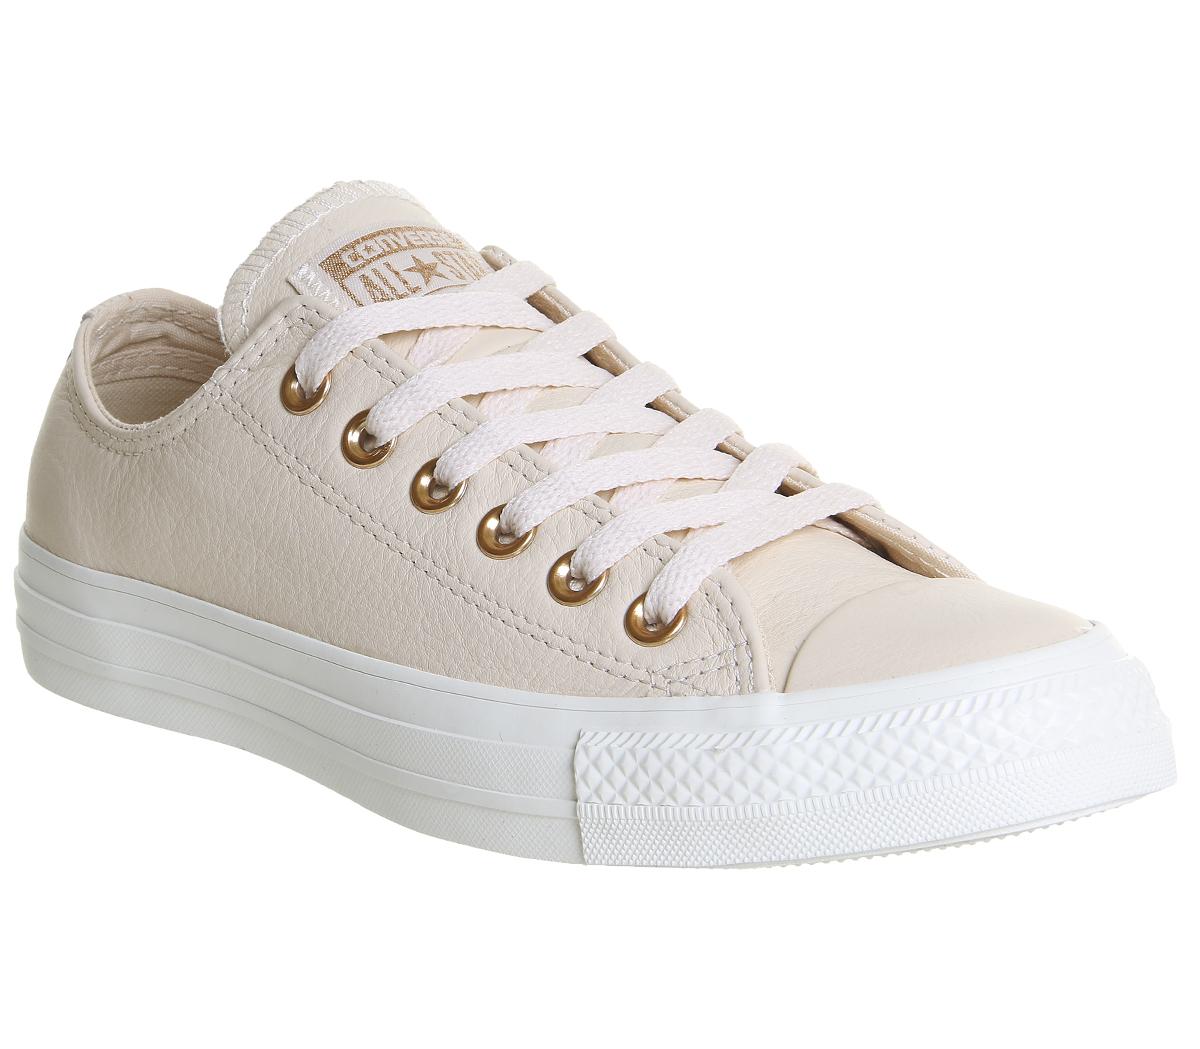 All Star Low Leather Rose Gold Exclusive on Sale, SAVE 41% - oxforddowns.com